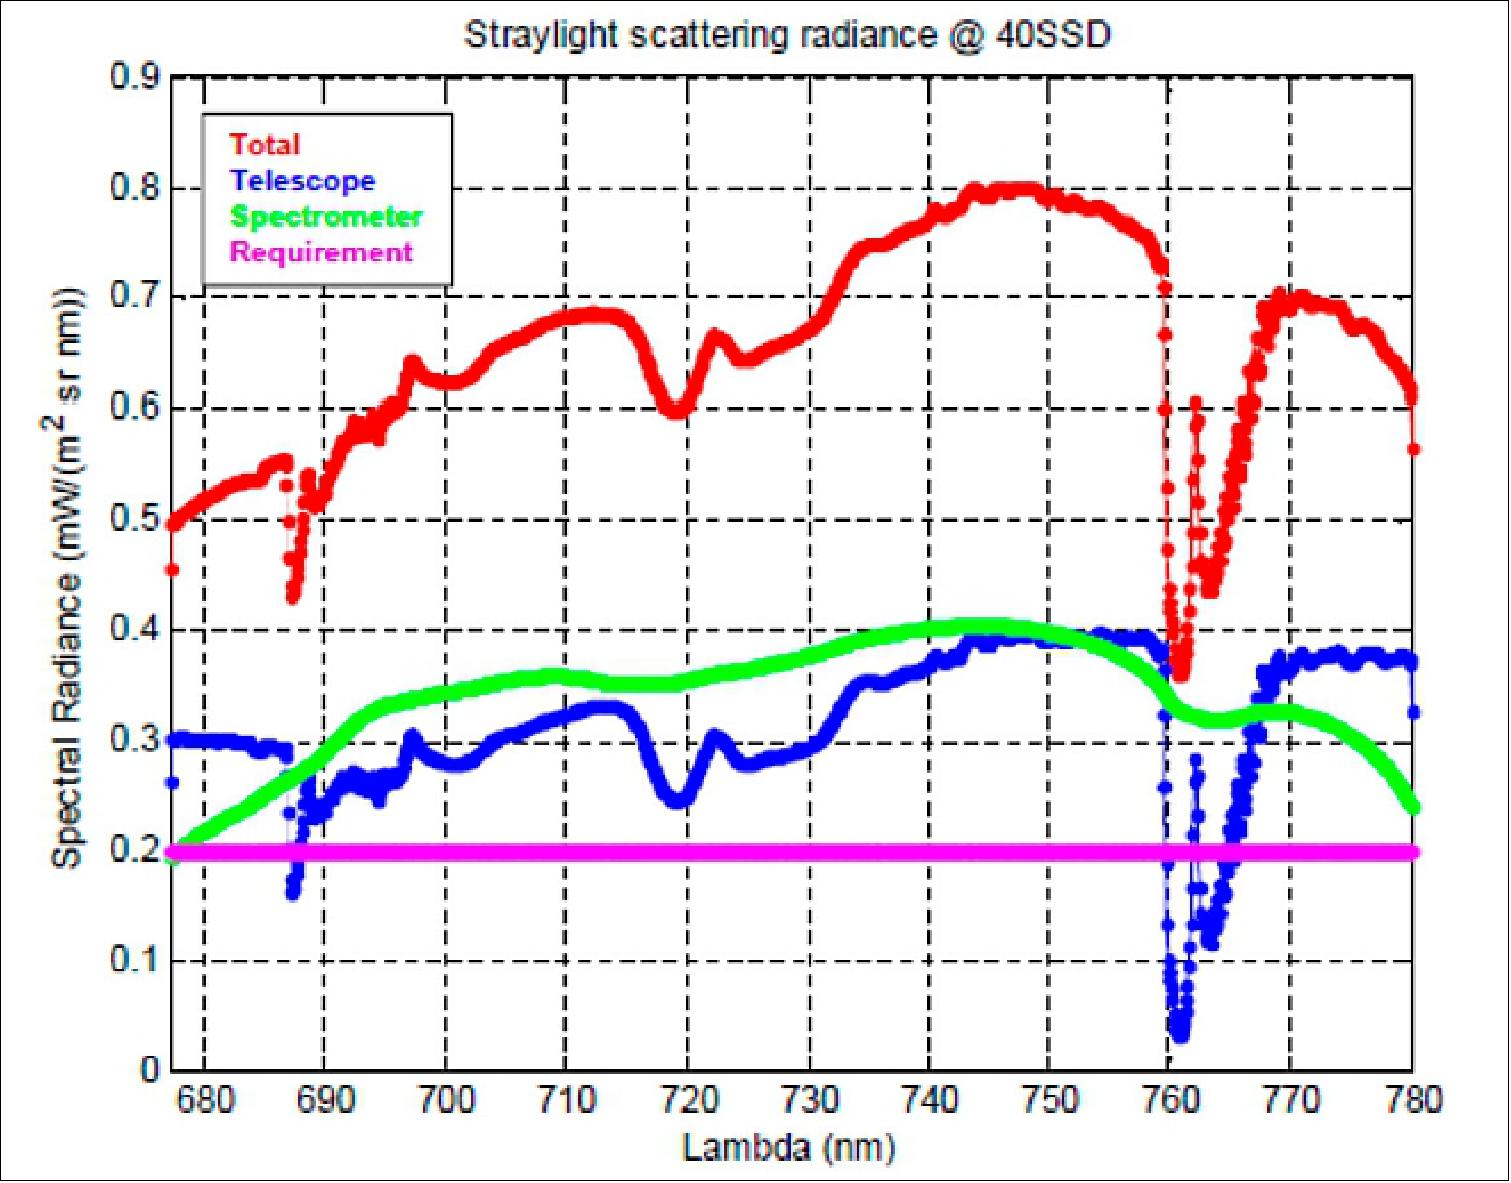 Figure 26: Comparison between straylight radiance evaluation and requirement at level L0 (image credit: FLEX collaboration)